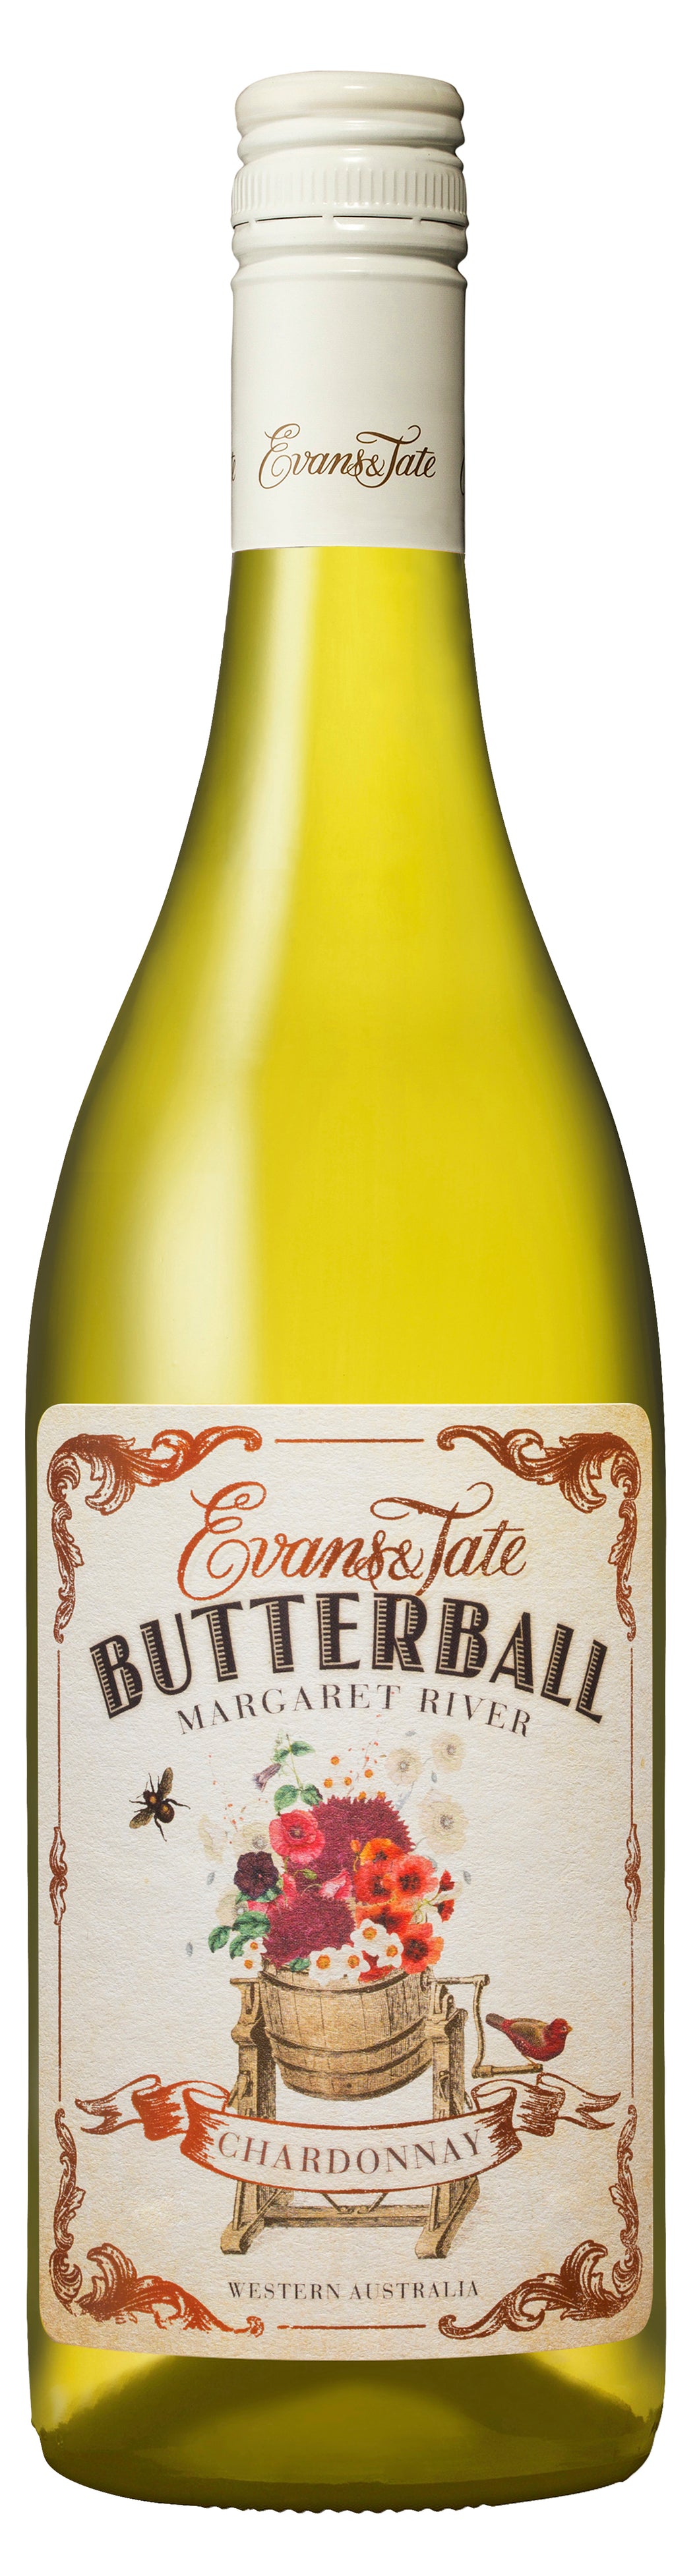 2019 expressions butterball chardonnay